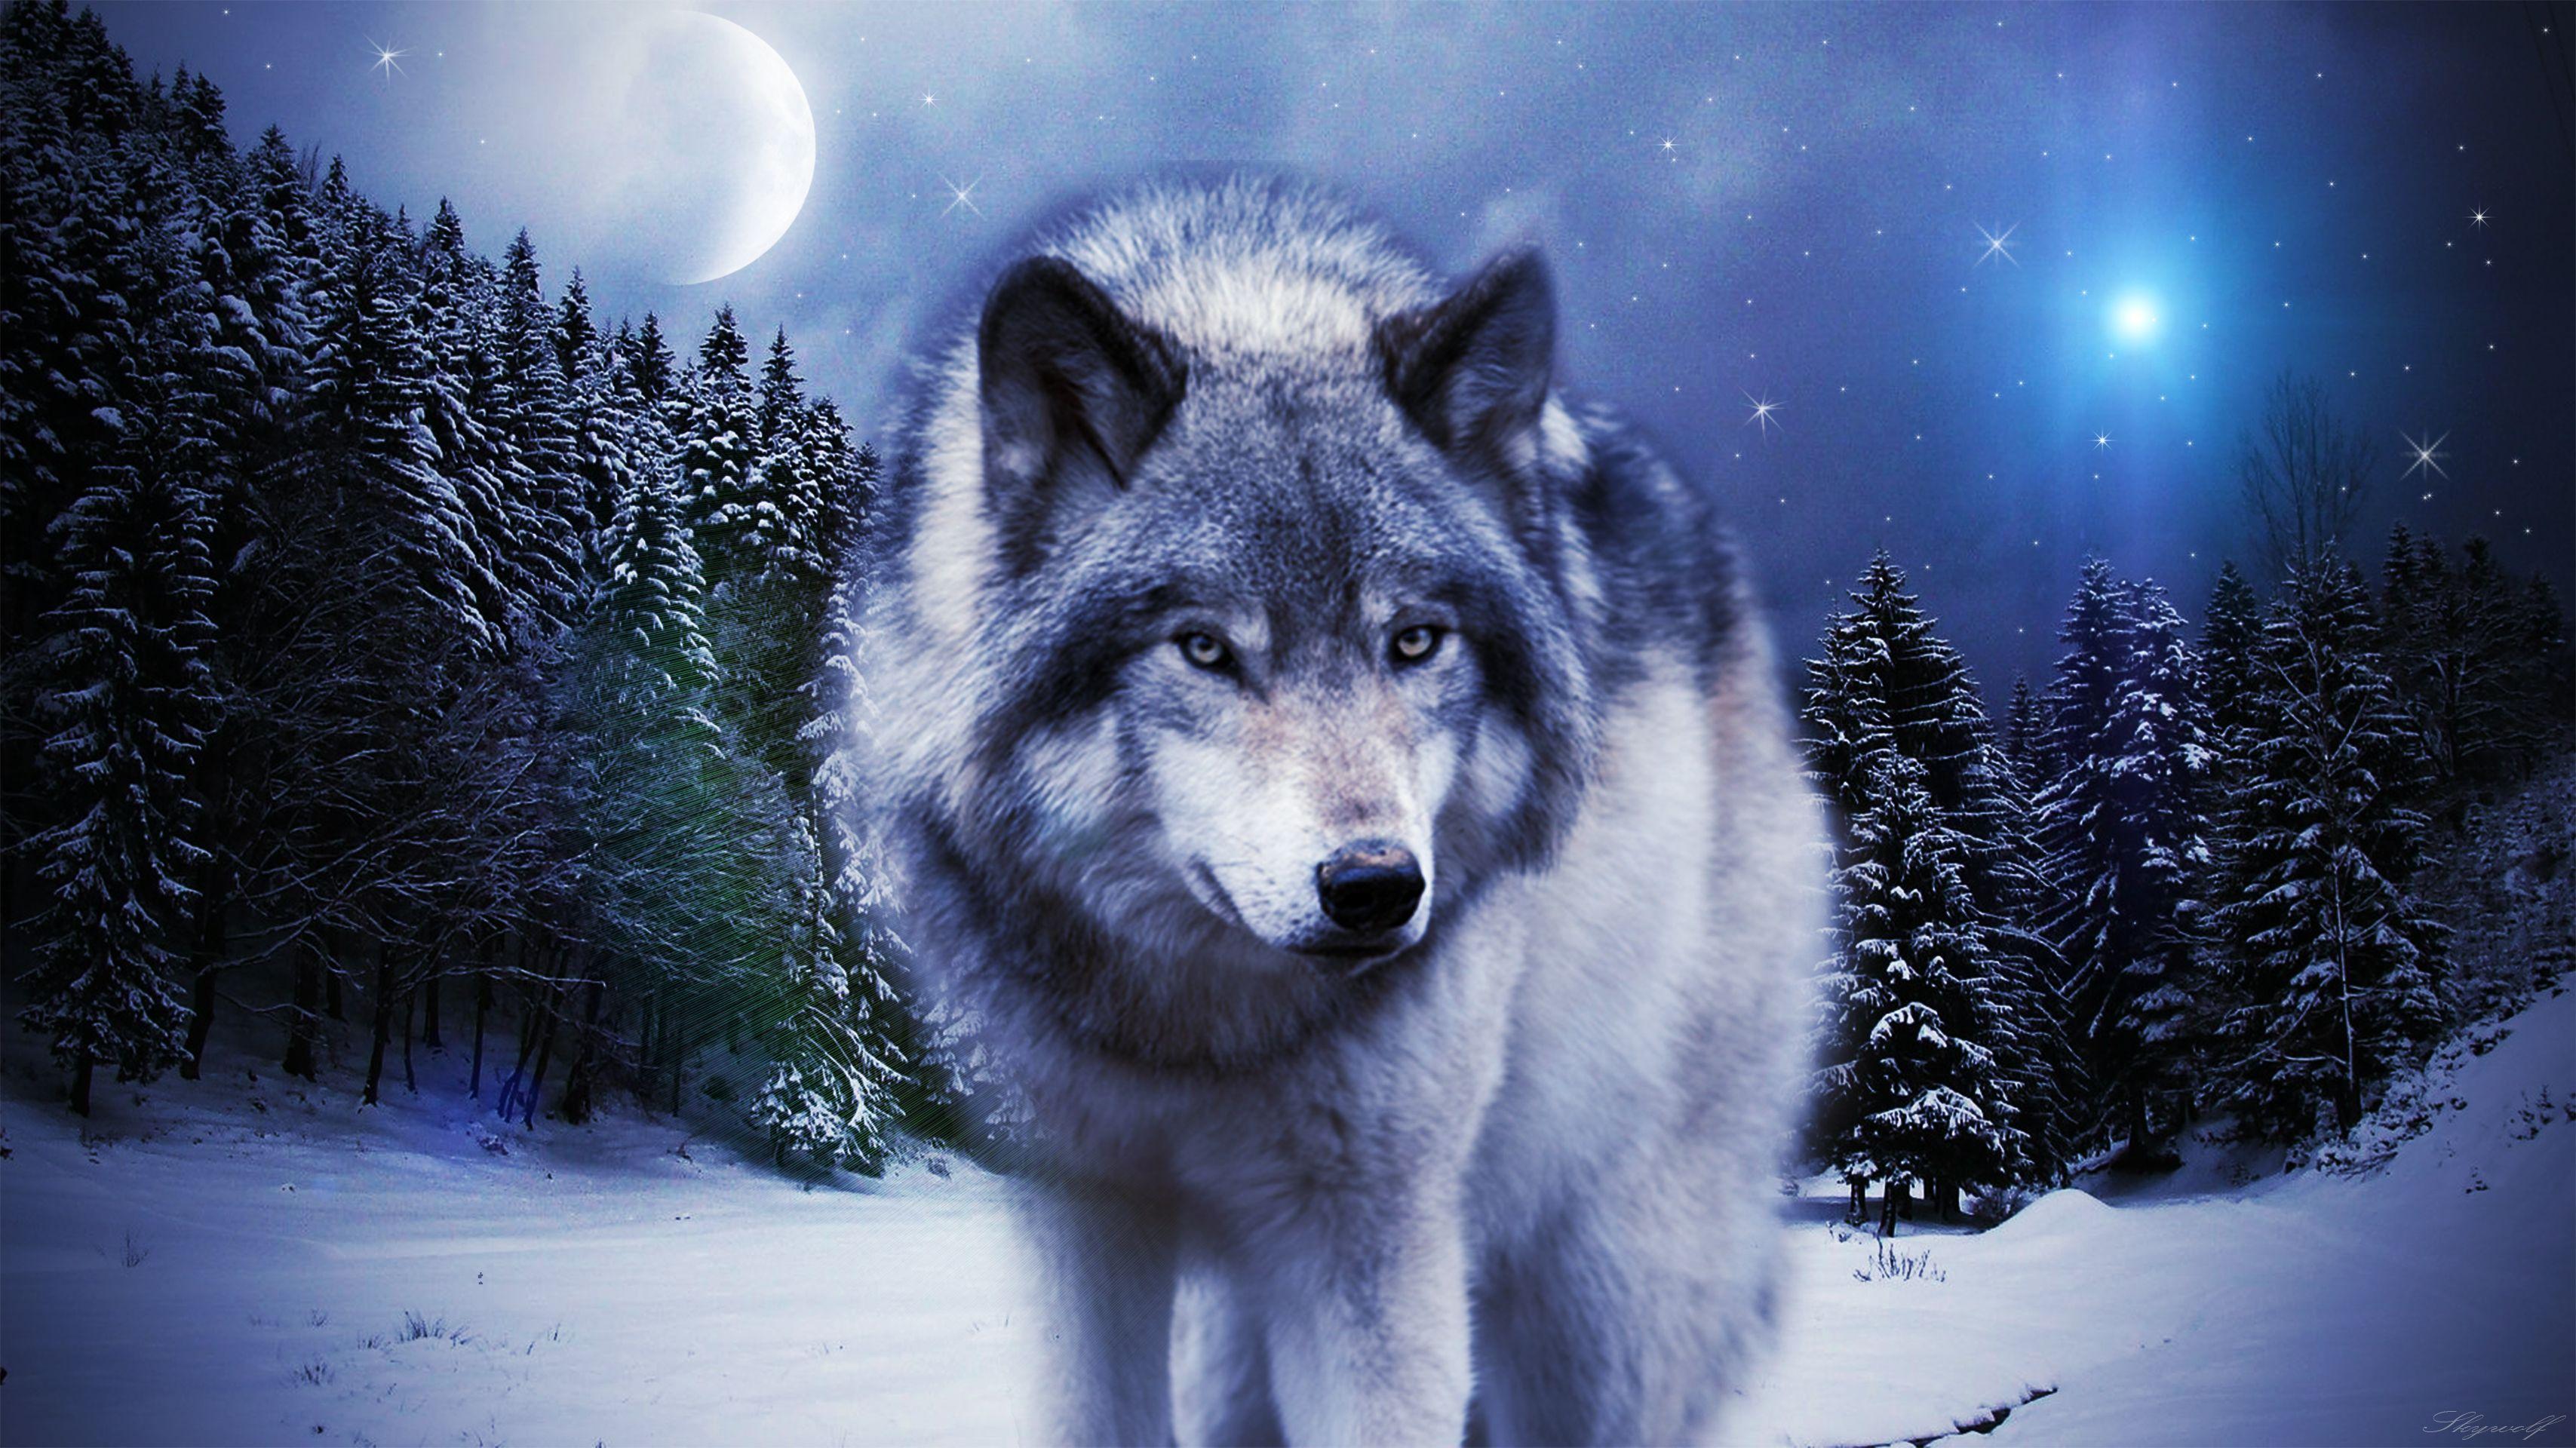 Galaxy Wolf Wallpapers - Wallpaper Cave